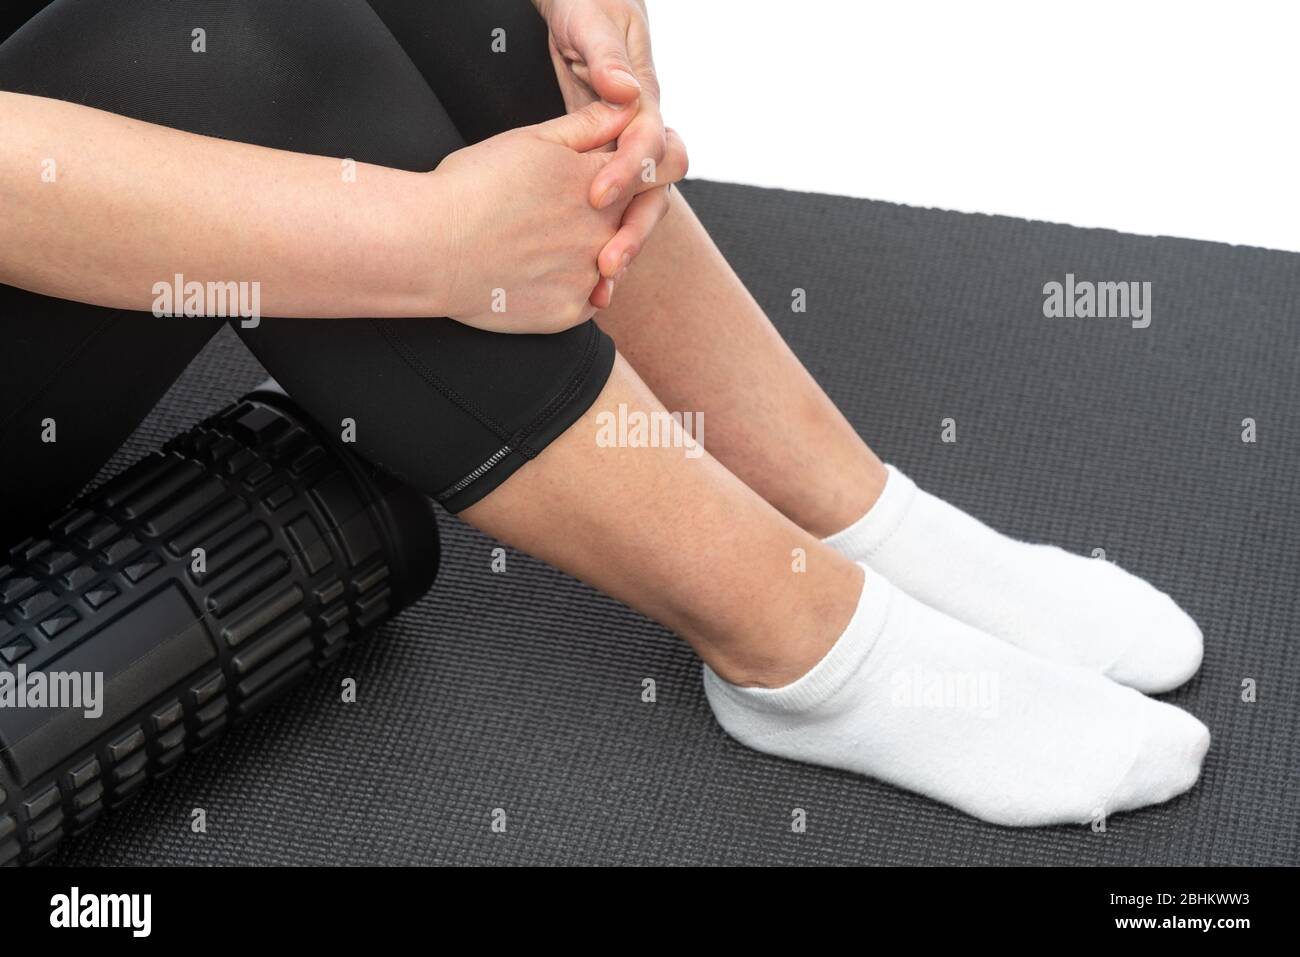 A middle-aged woman on a myofascial roller prepared to do cellulite massage Stock Photo